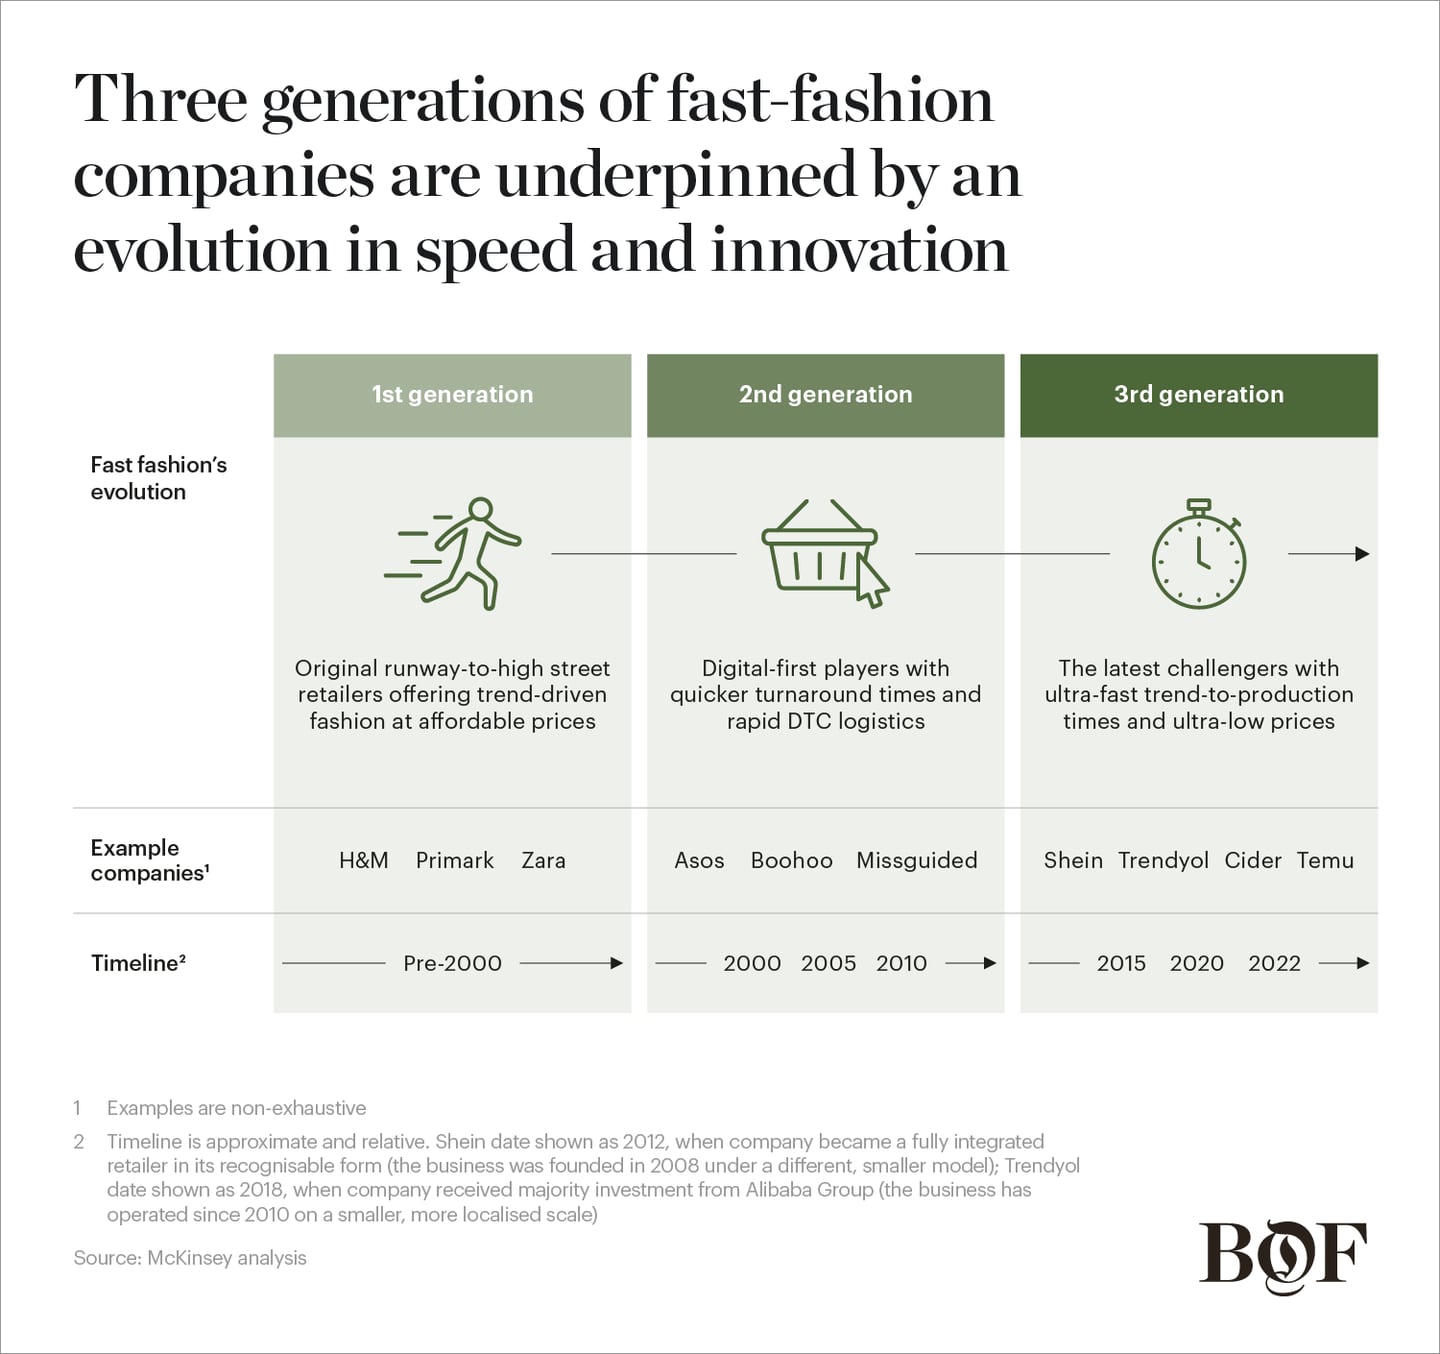 Fast fashion companies' evolution in speed and innovation